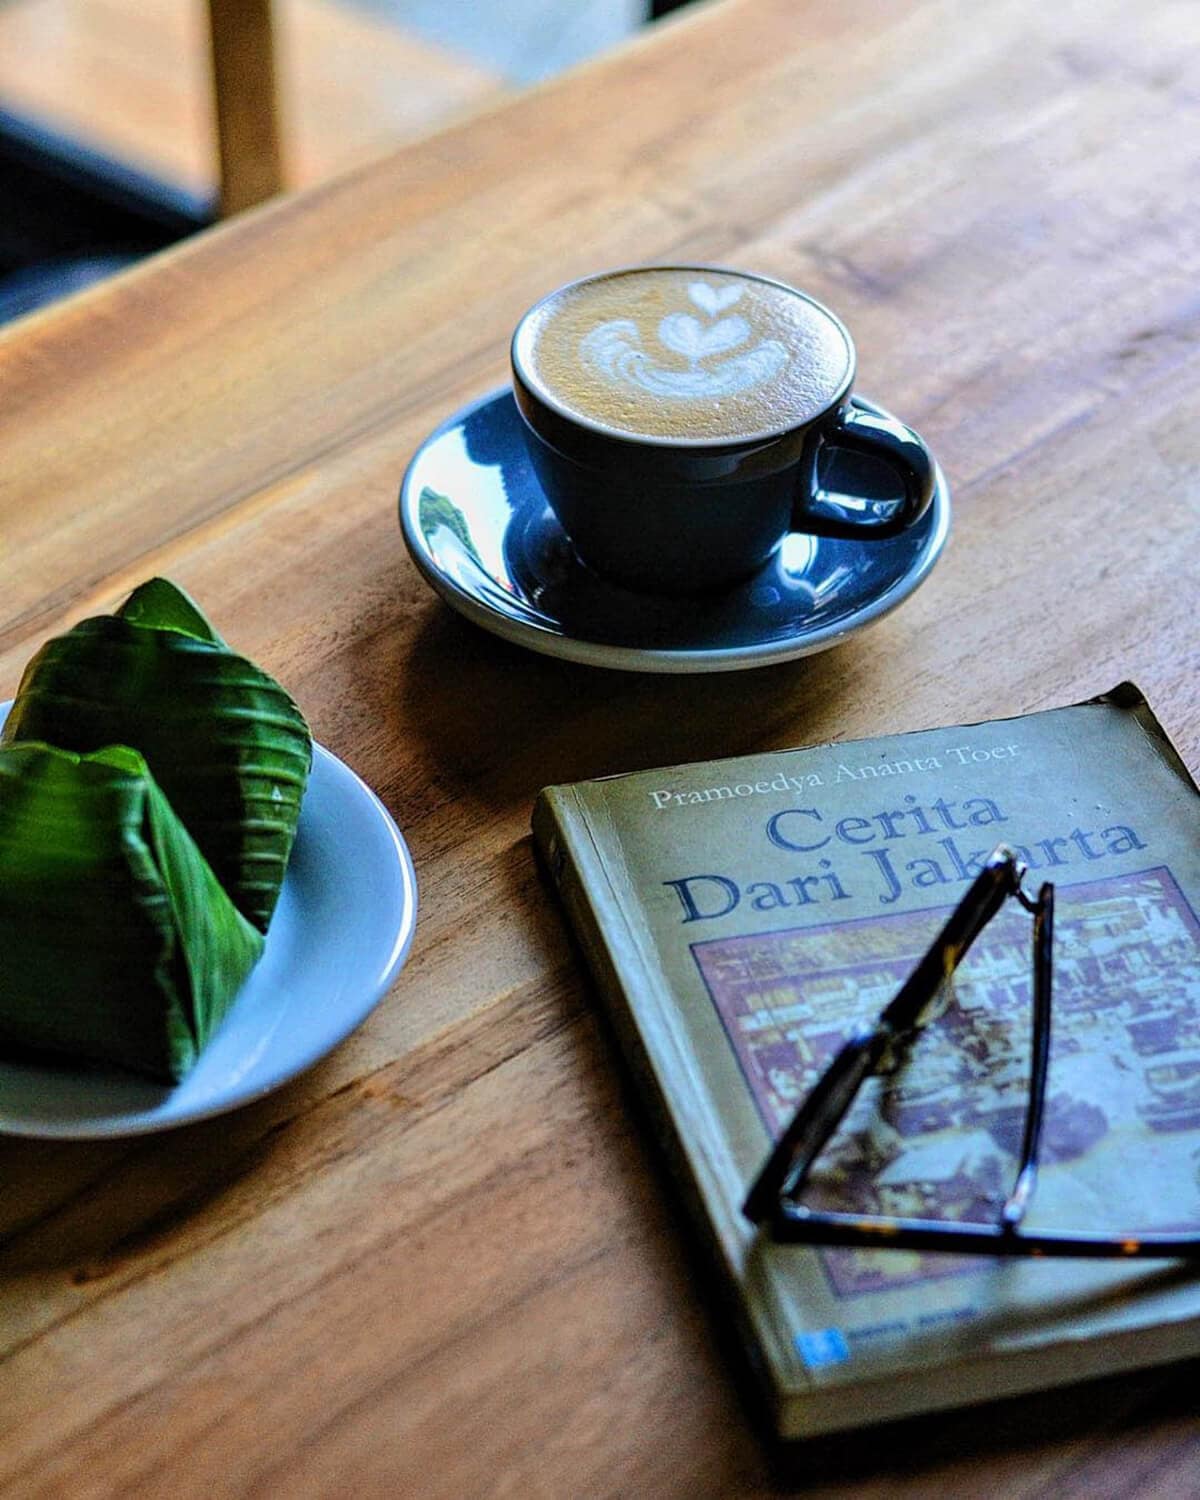 20 Coffee Shops That You Will Need to Enjoy in Jakarta